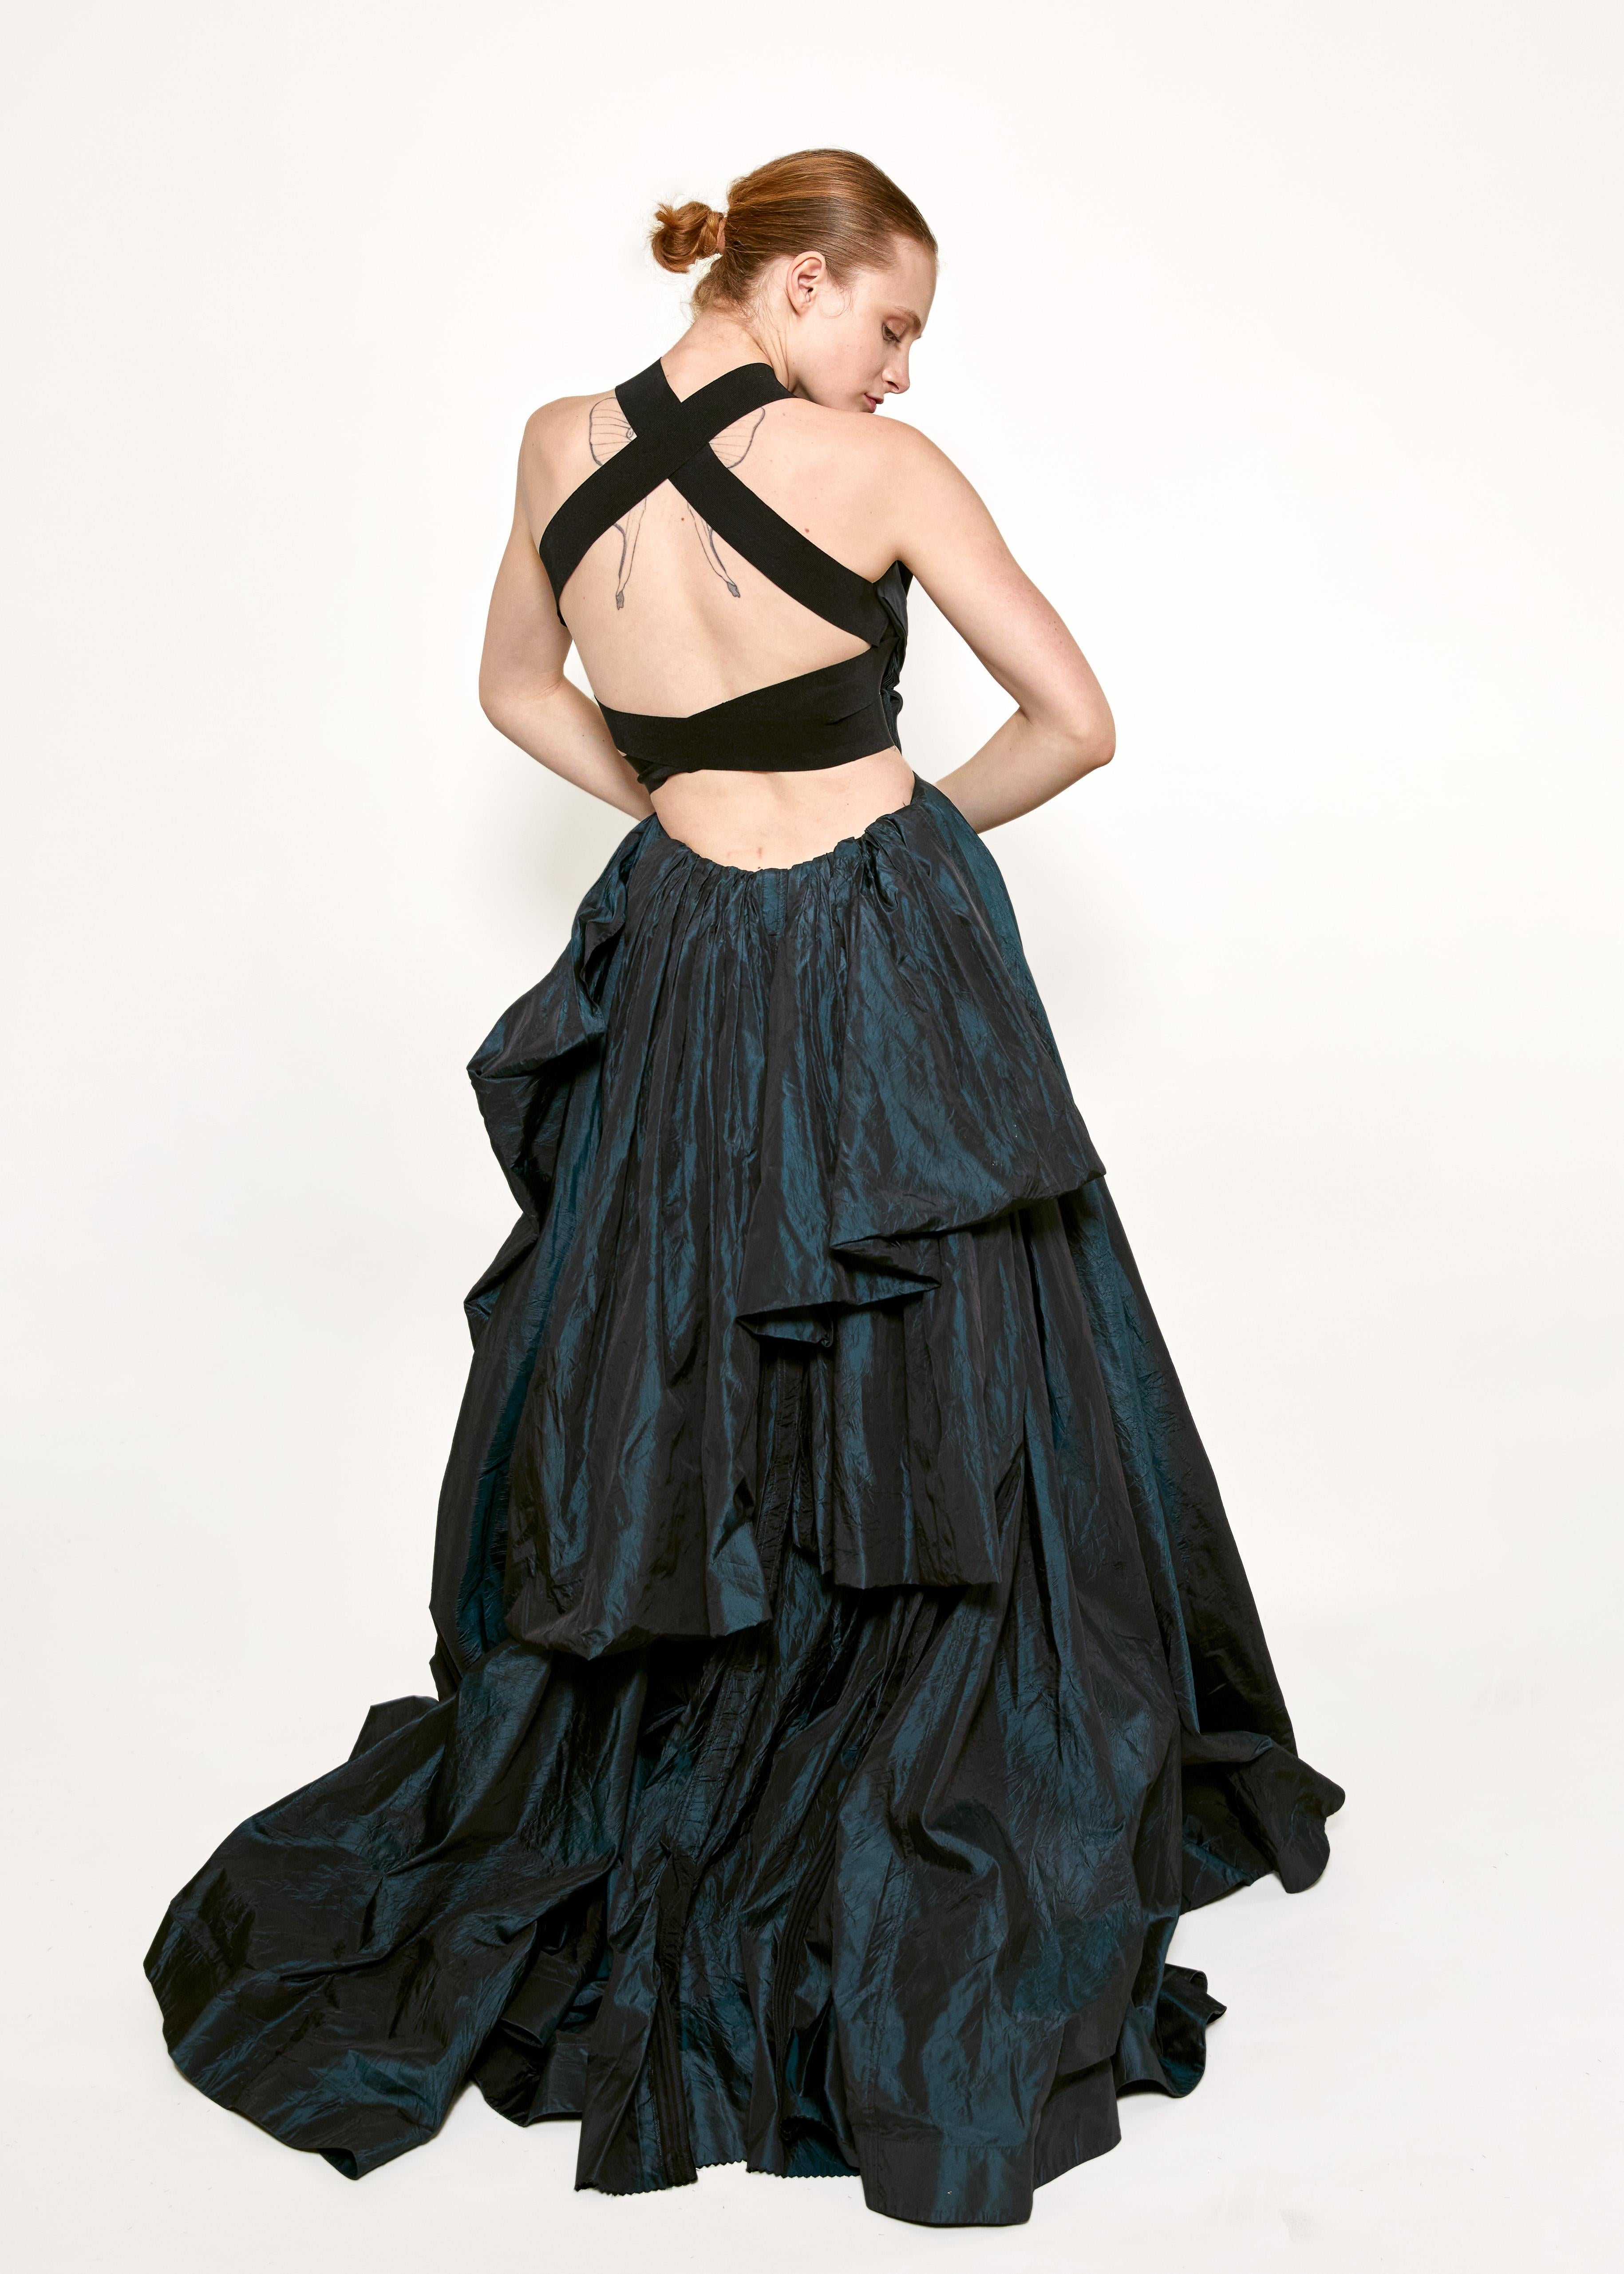 Be bold with the Donna Karan 2006 Iridescent Blue Taffeta Gown. Made with magical iridescent taffeta, this gown creates a dark fairytale illusion in black/blue. Embrace the whimsical and take risks with this breathtaking piece.
Made in the